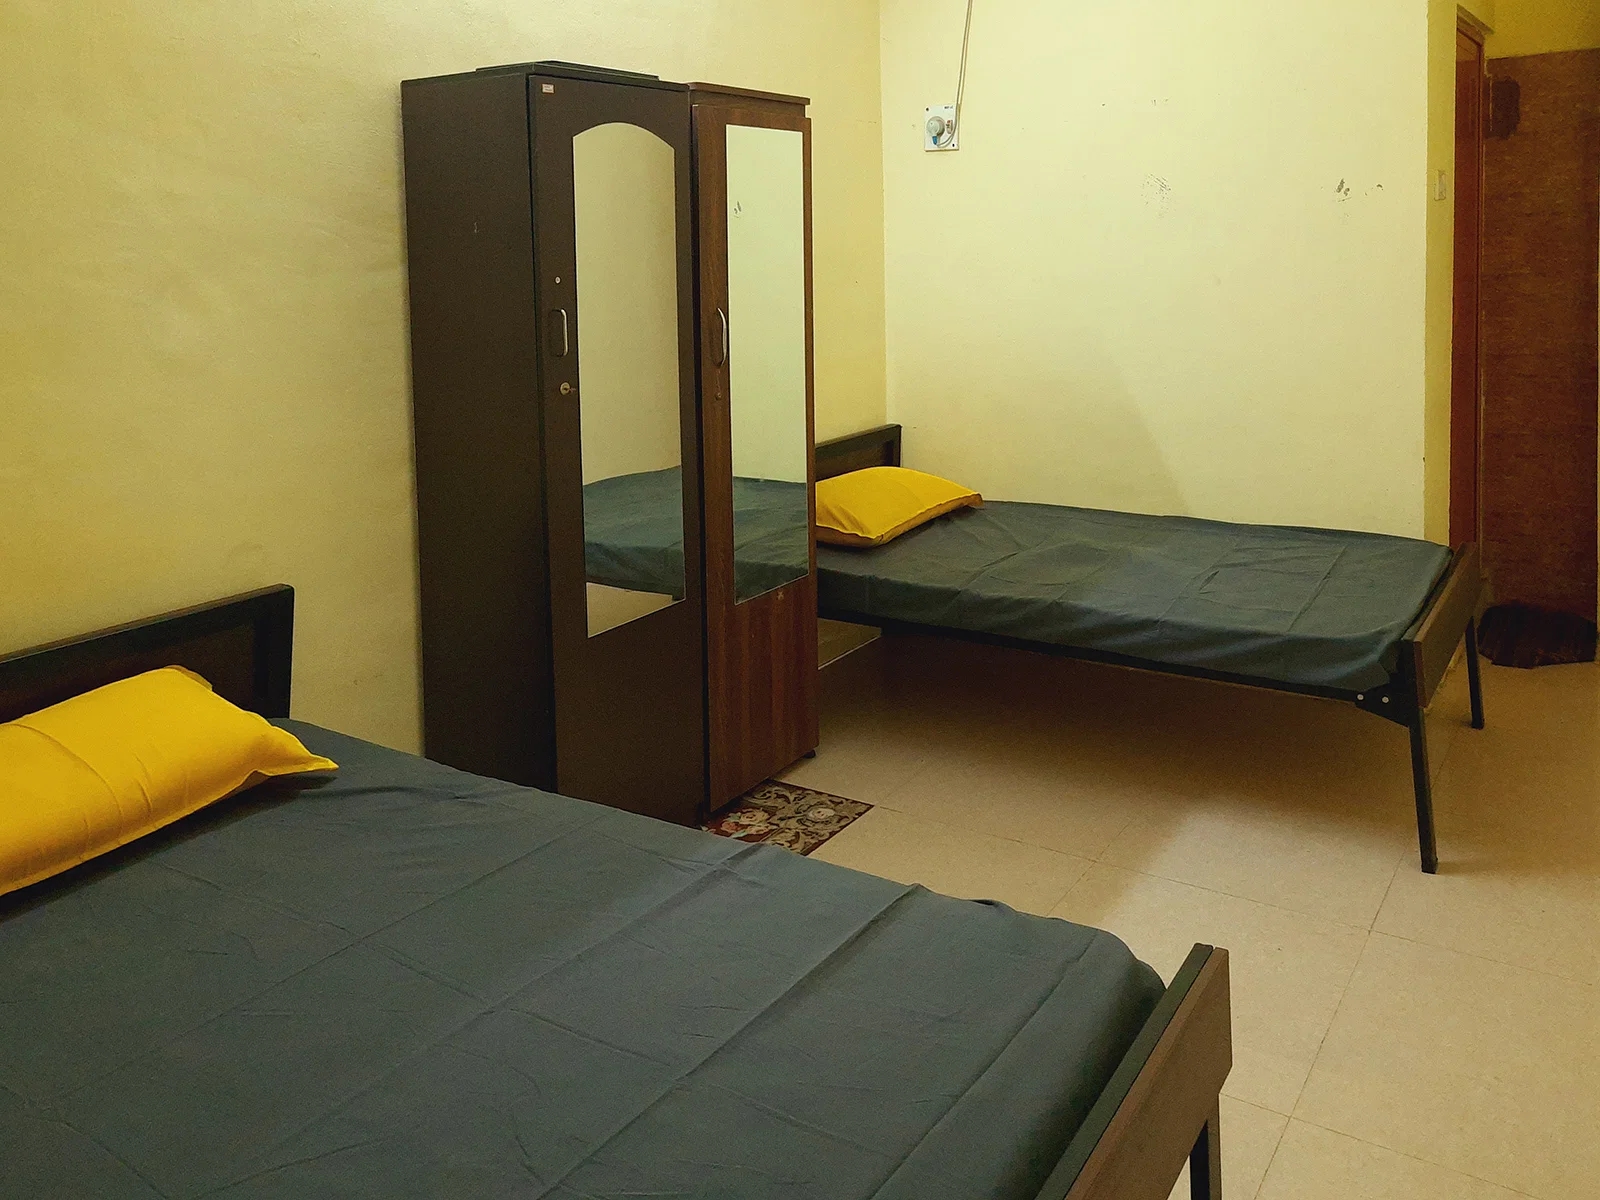 pgs in Perumbakkam with Daily housekeeping facilities and free Wi-Fi-Zolo Seltos